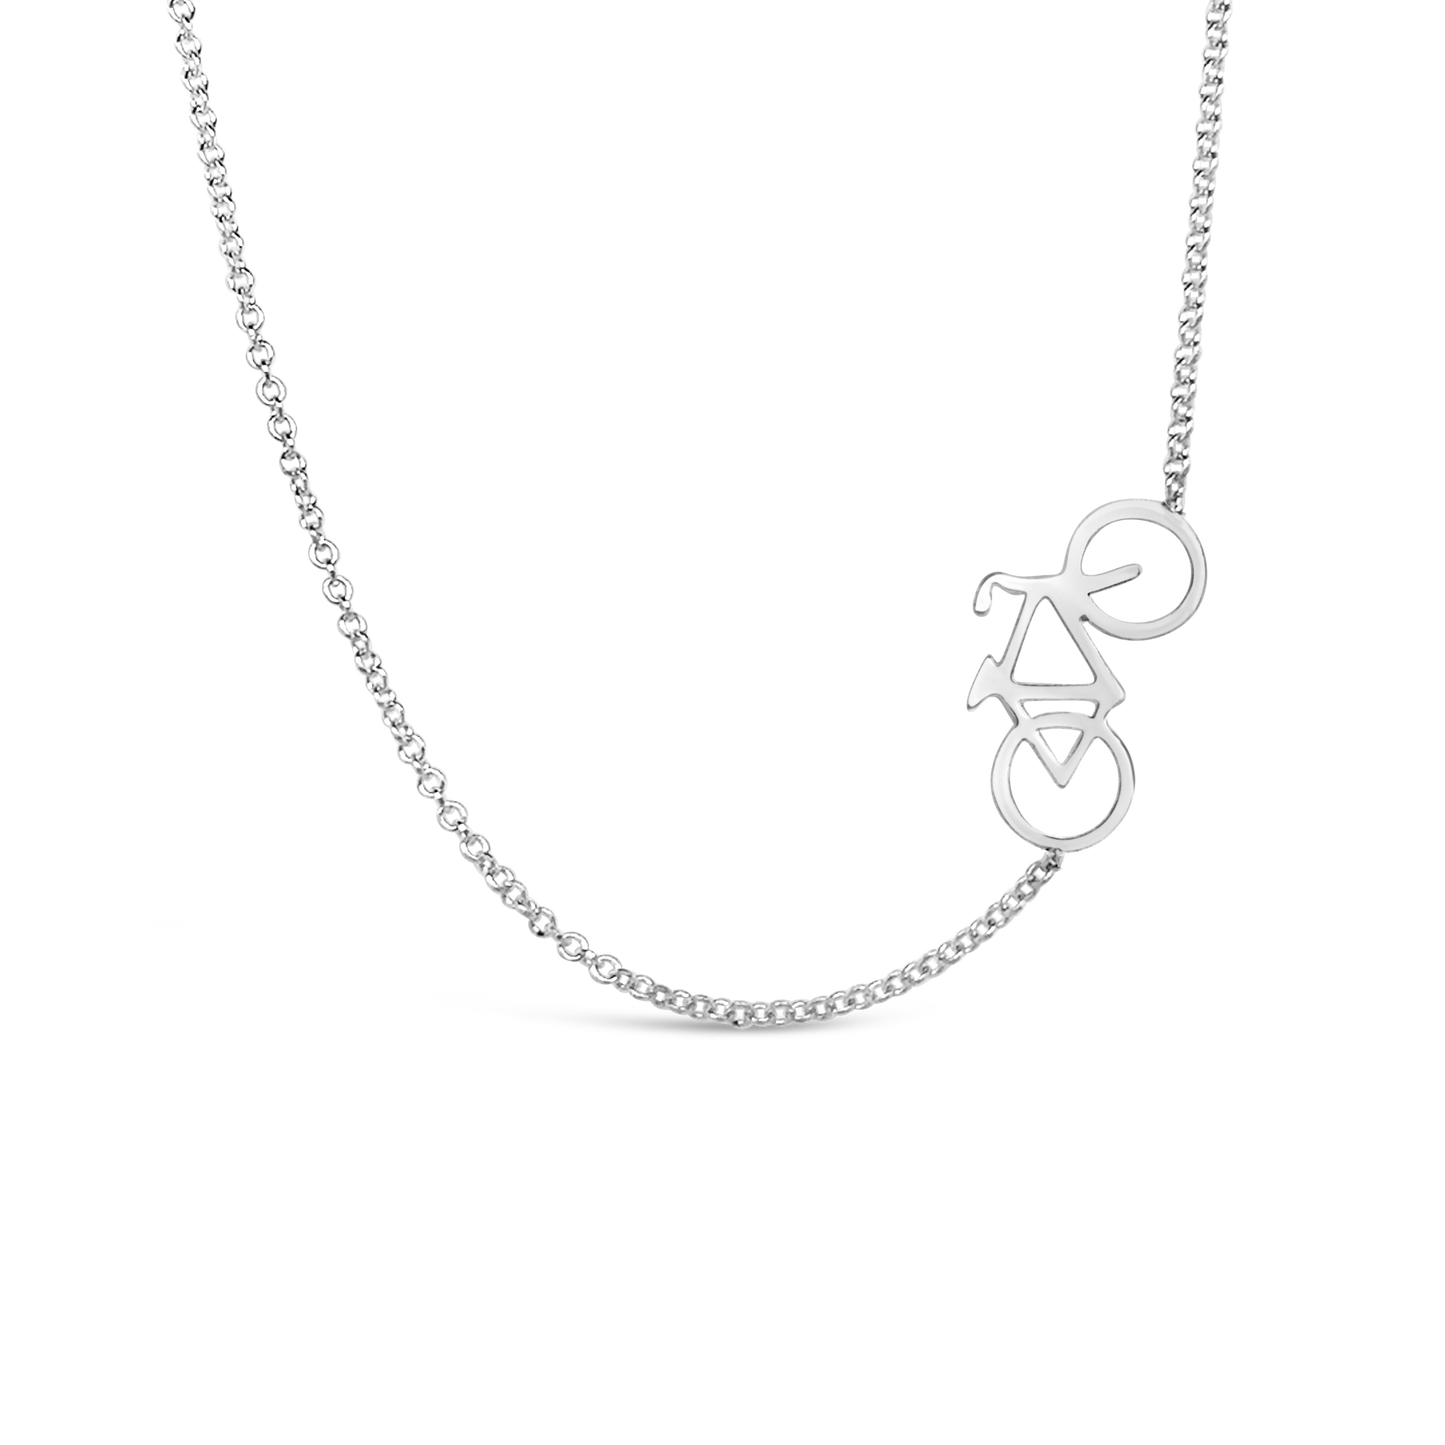 Asymmetrical Bicycle Necklace - Silver